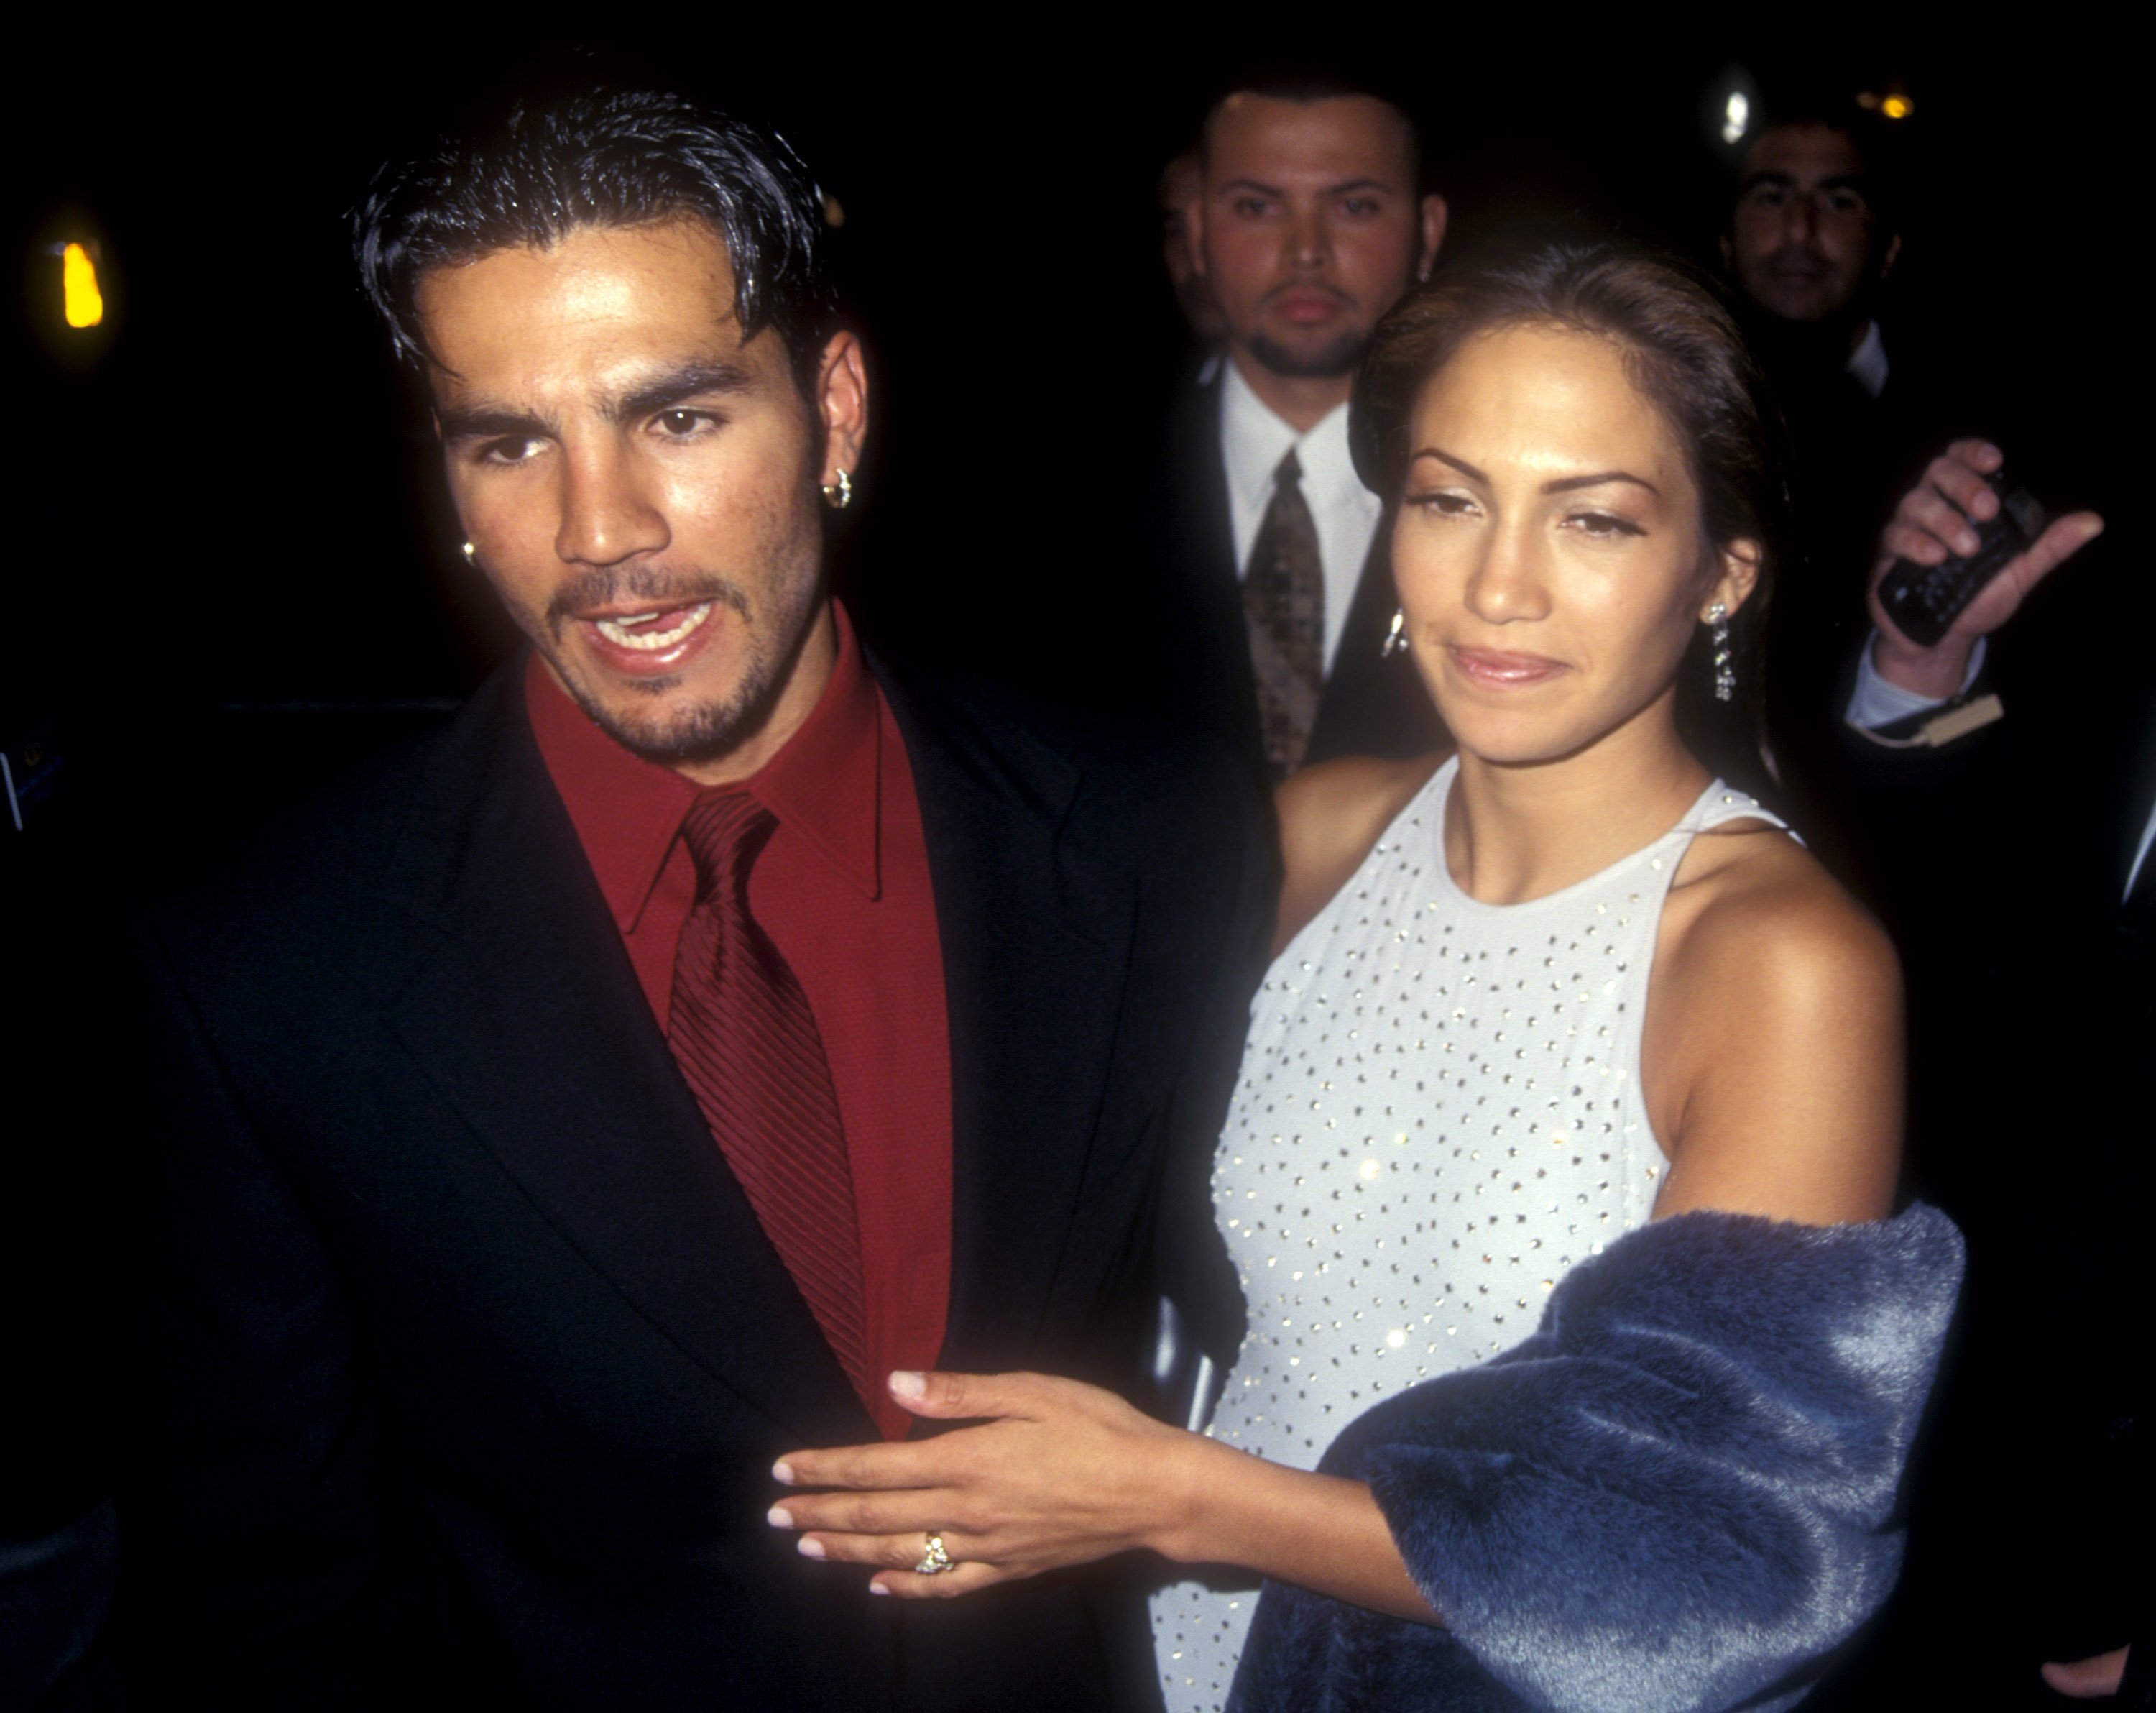 Jennifer Lopez and Ojani Noa during the premiere of "Selena" at Pacific Cinerama Dome in Hollywood, California. | Source: Getty Images